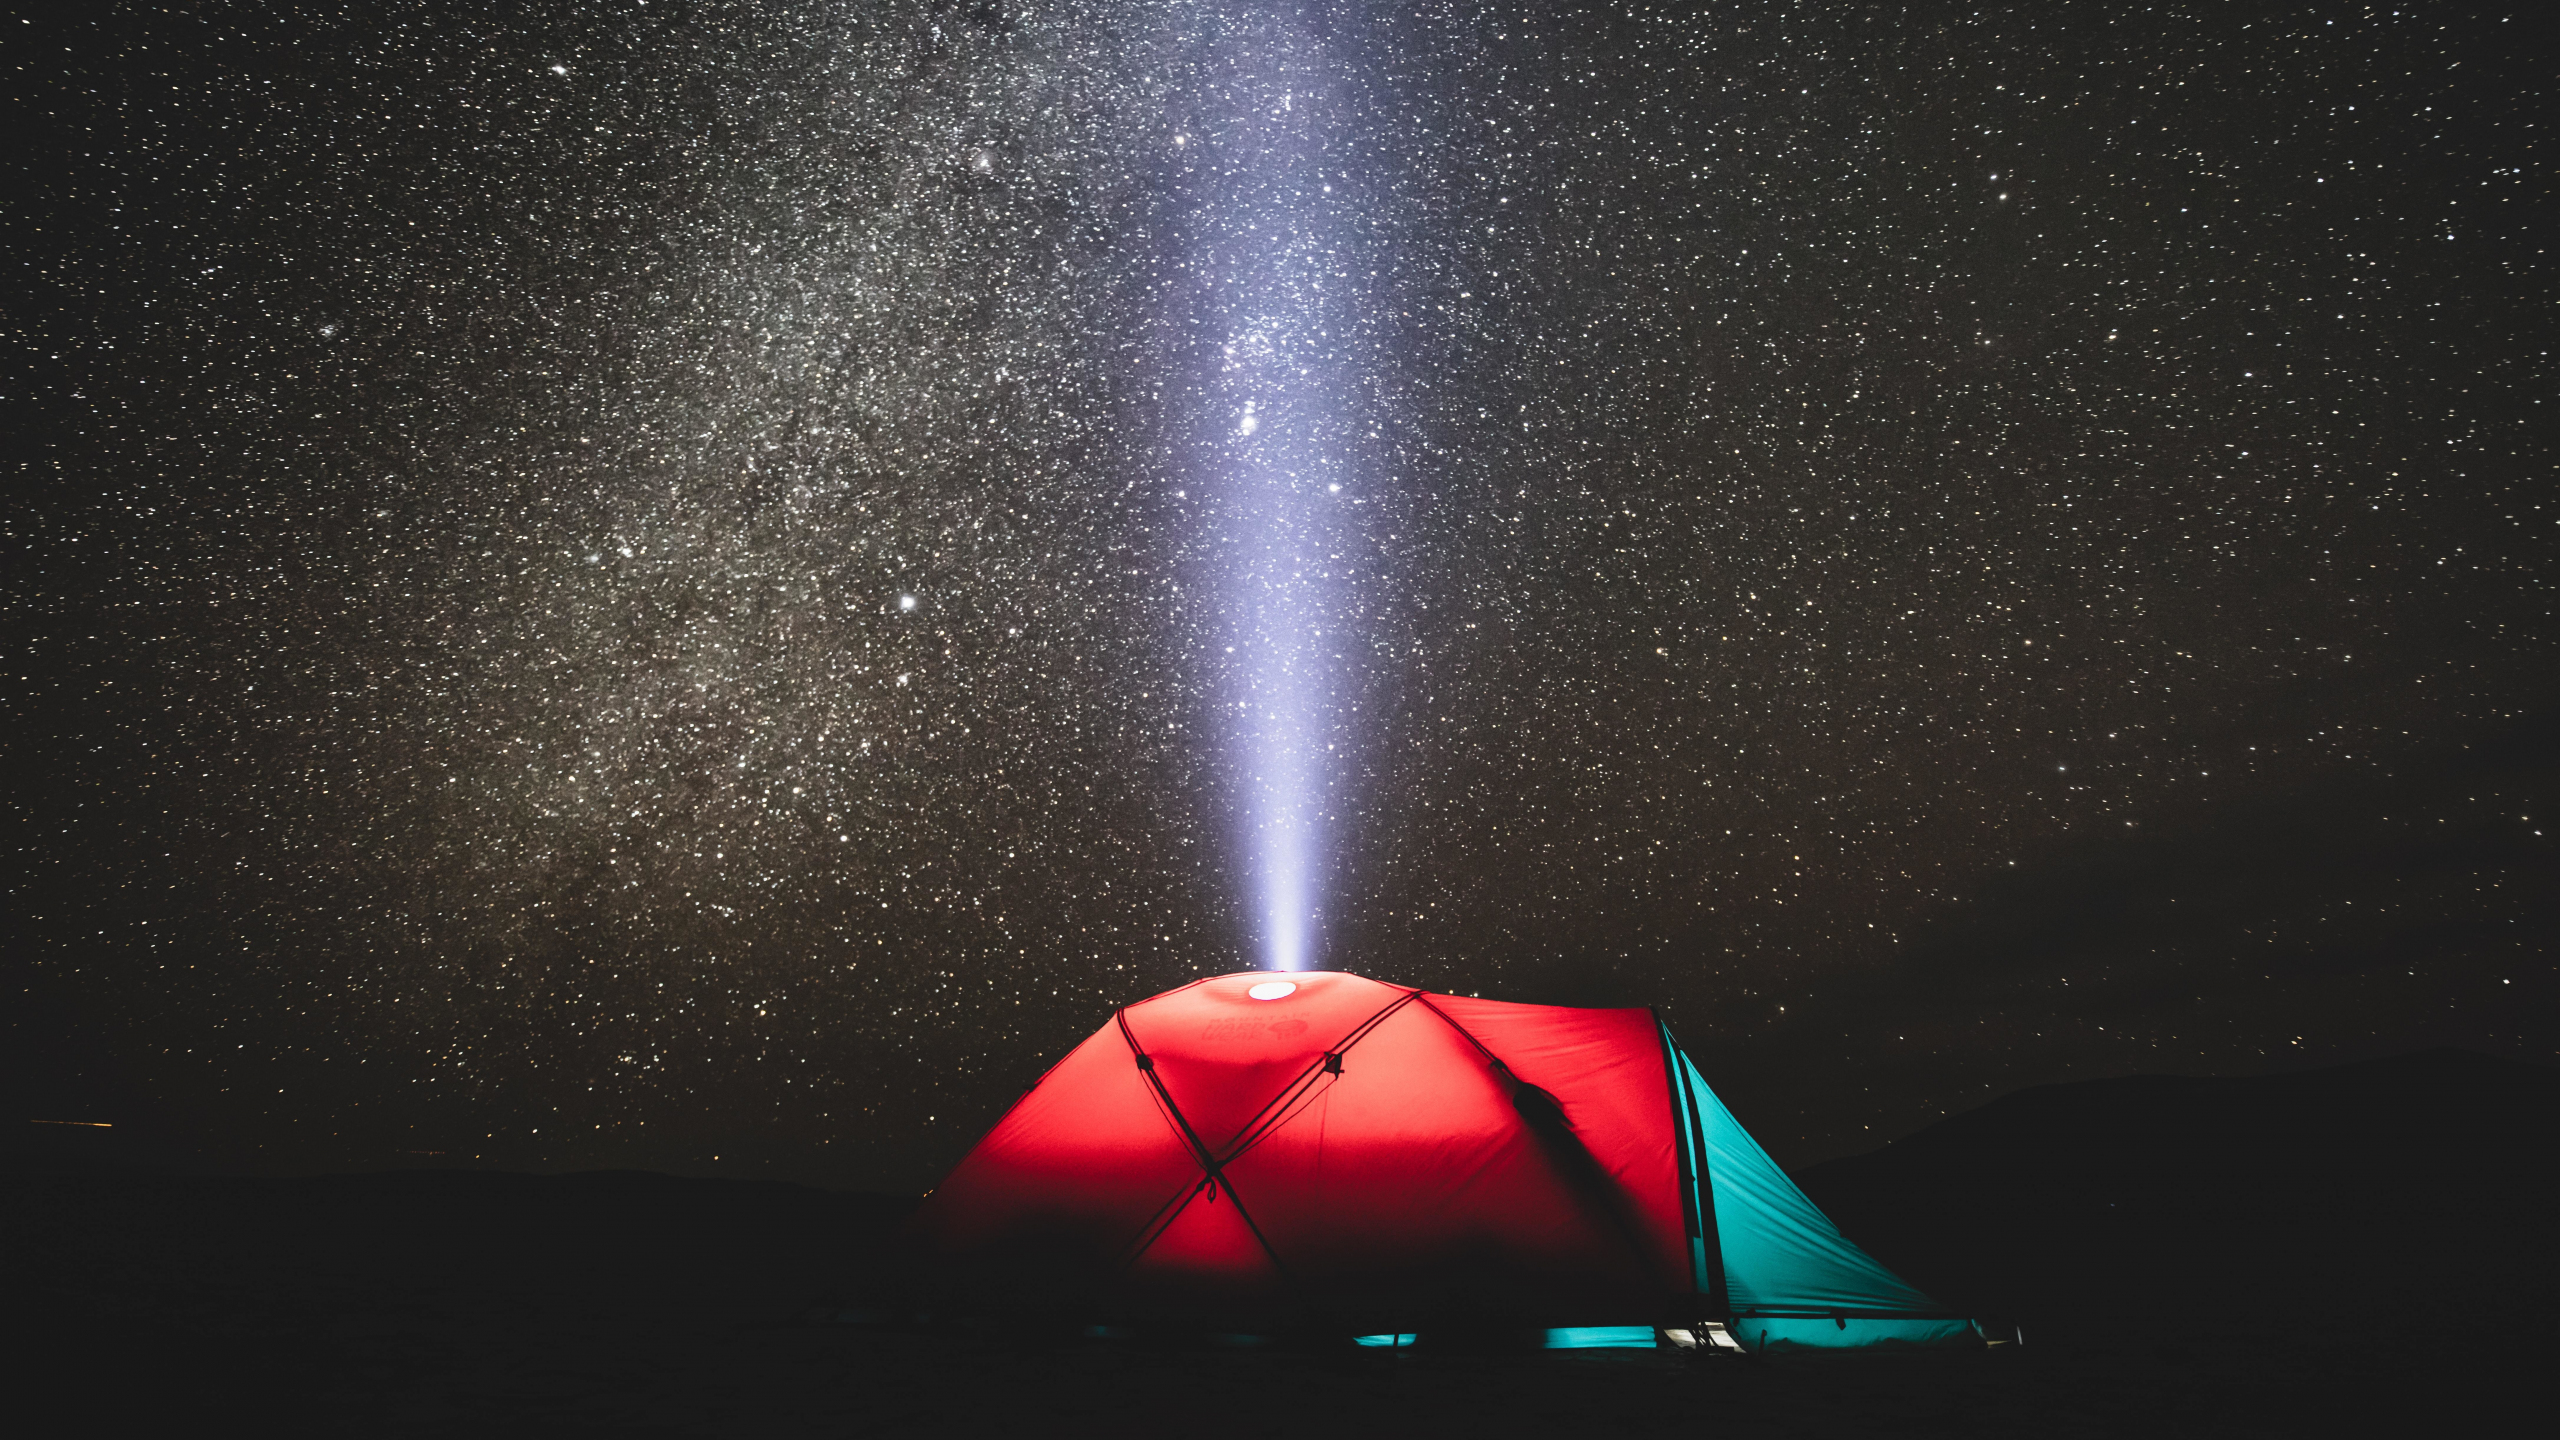 Download wallpaper x night out camp tent dark sky dual wide x hd background